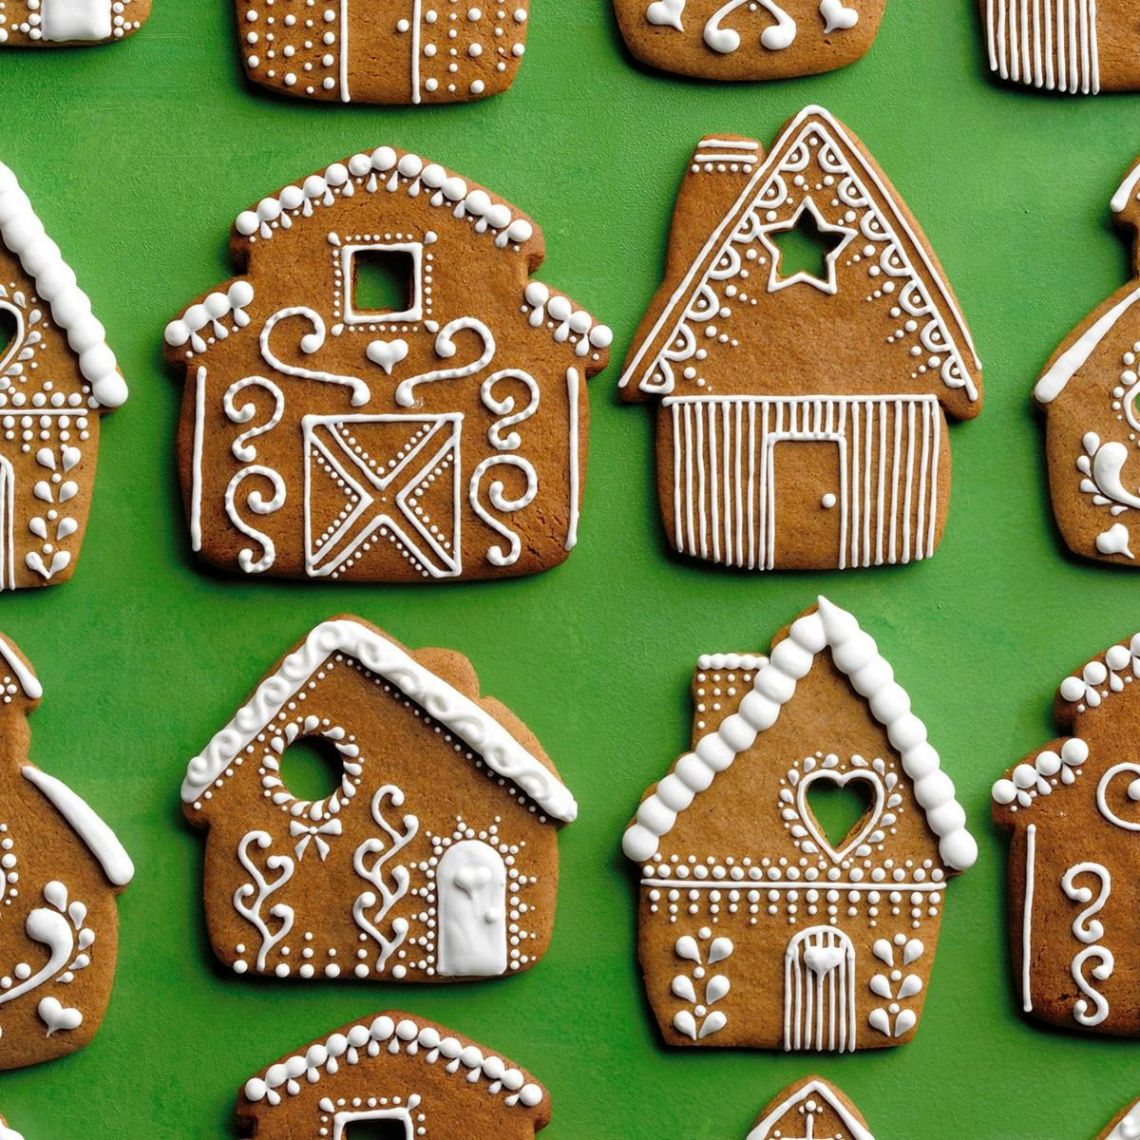 of the Best Gingerbread Cookies You Can Bake This Holiday